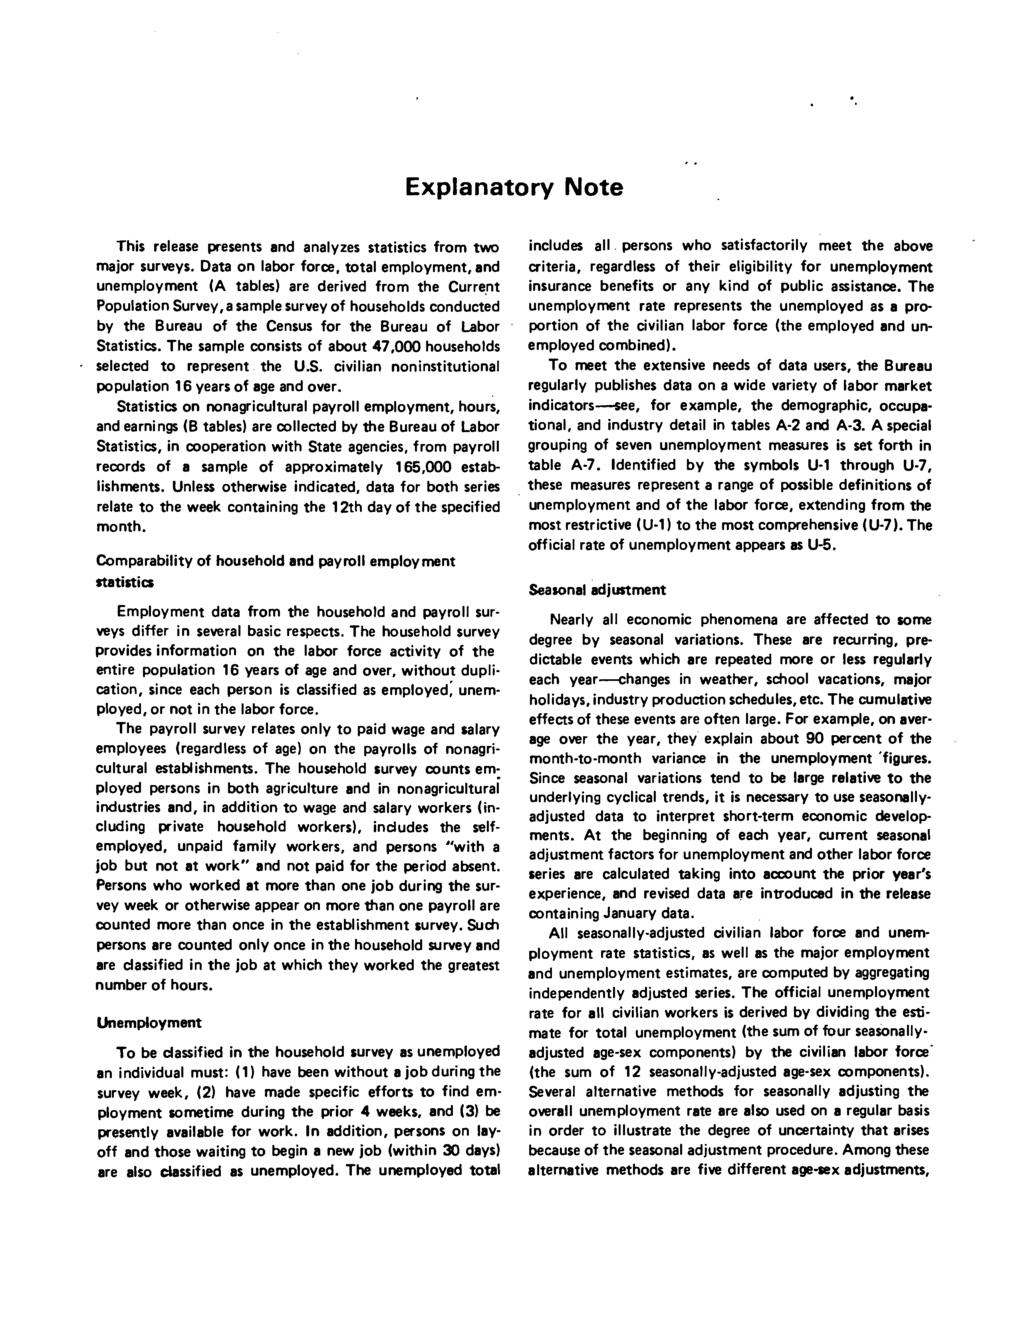 Explanatory Note This release presents and analyzes statistics from two major surveys.